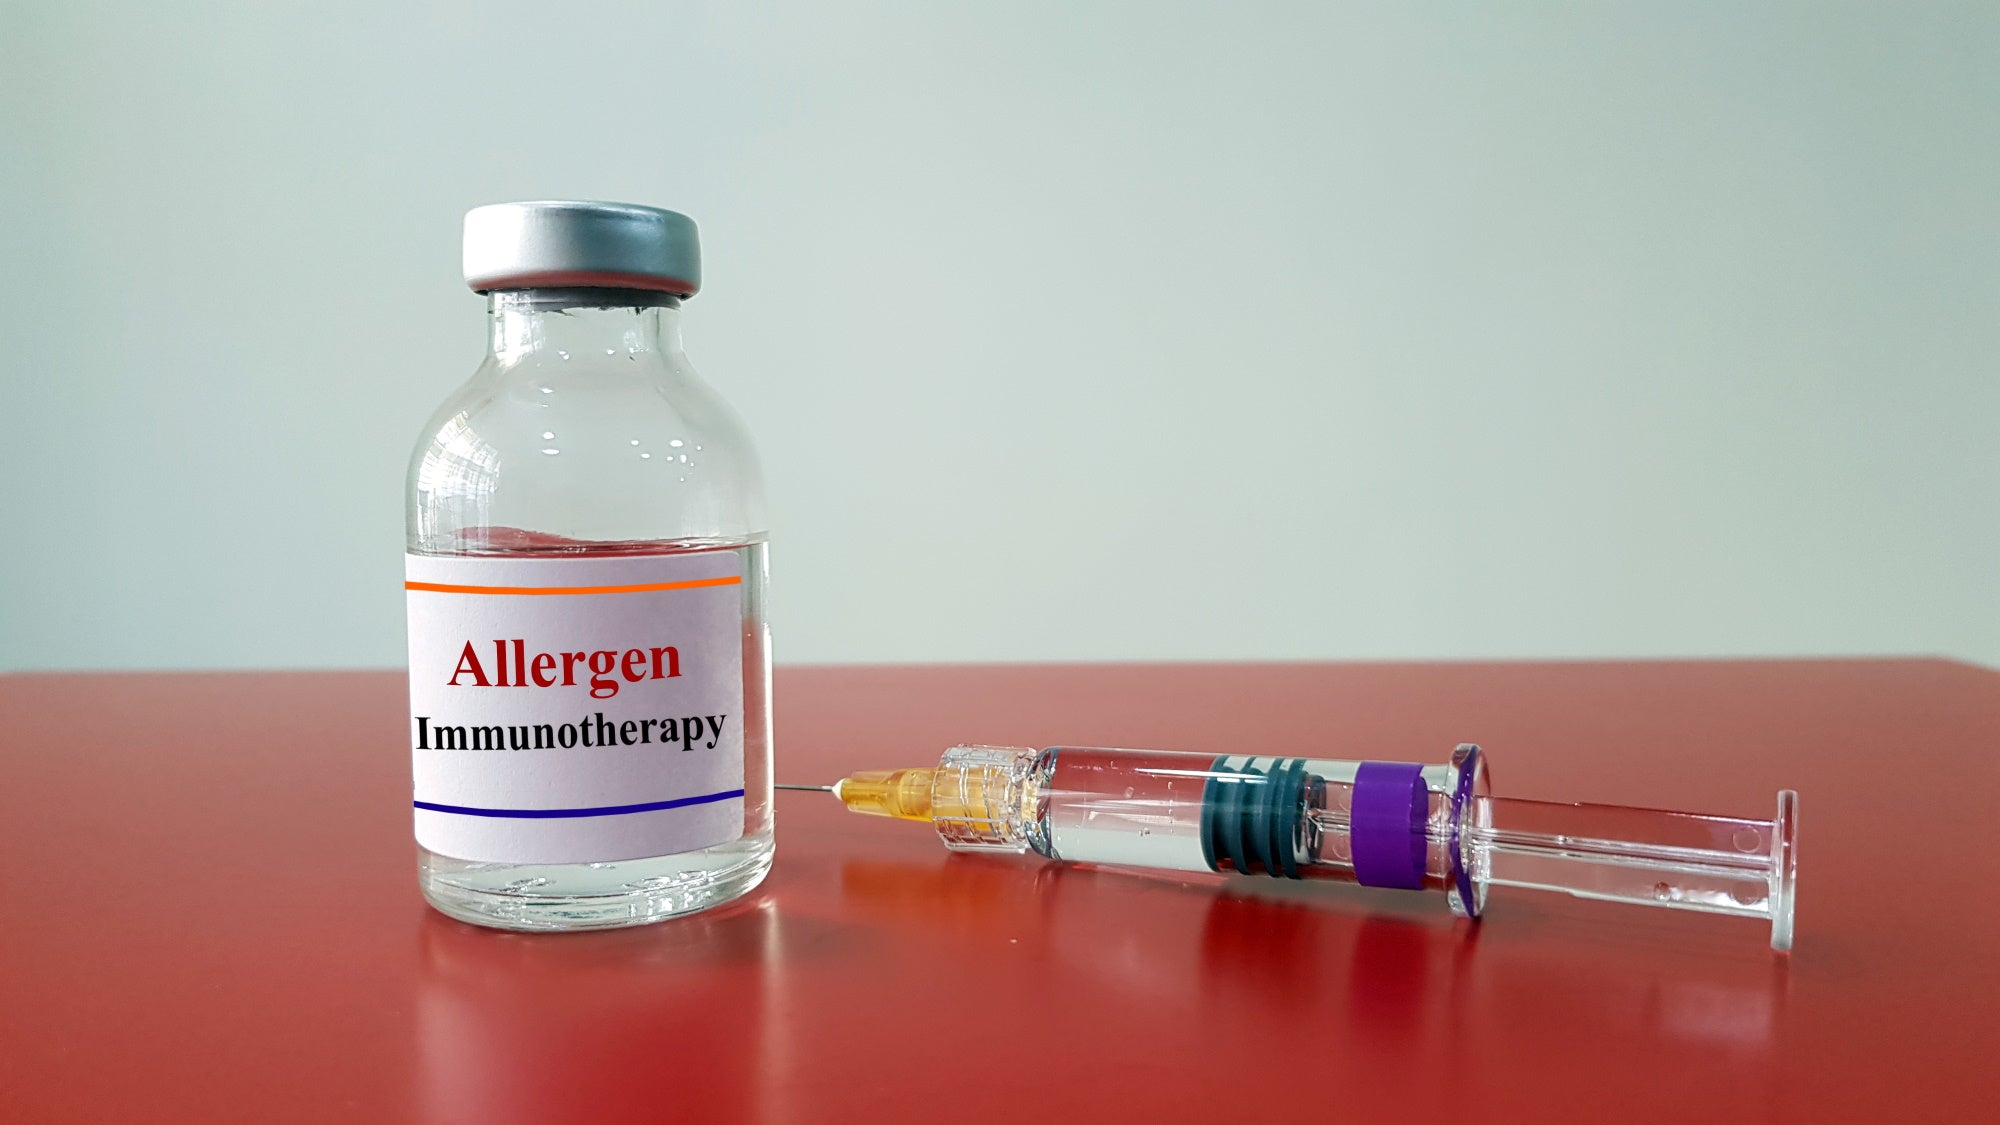 Syringe needle next to vial labeled 'Allergen Immunotherapy'